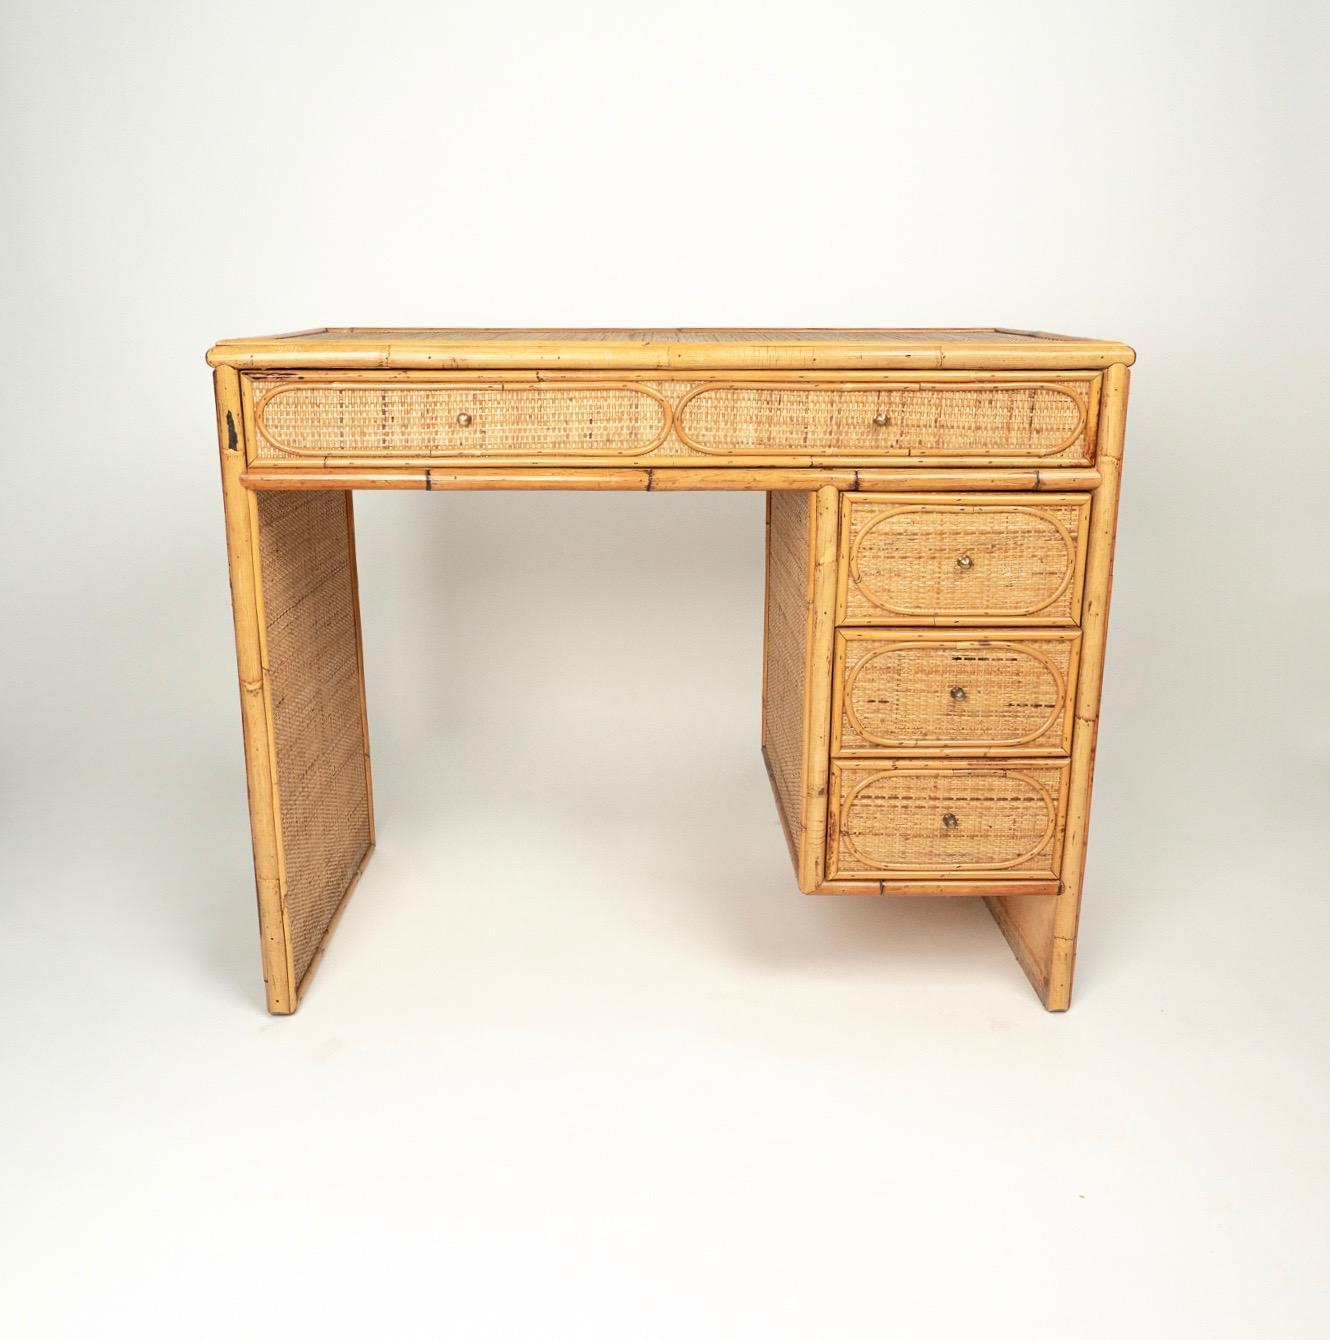 Mid-Century Modern Midcentury Bamboo, Wicker and Rattan Italian Desk Table with Drawers, 1970s For Sale